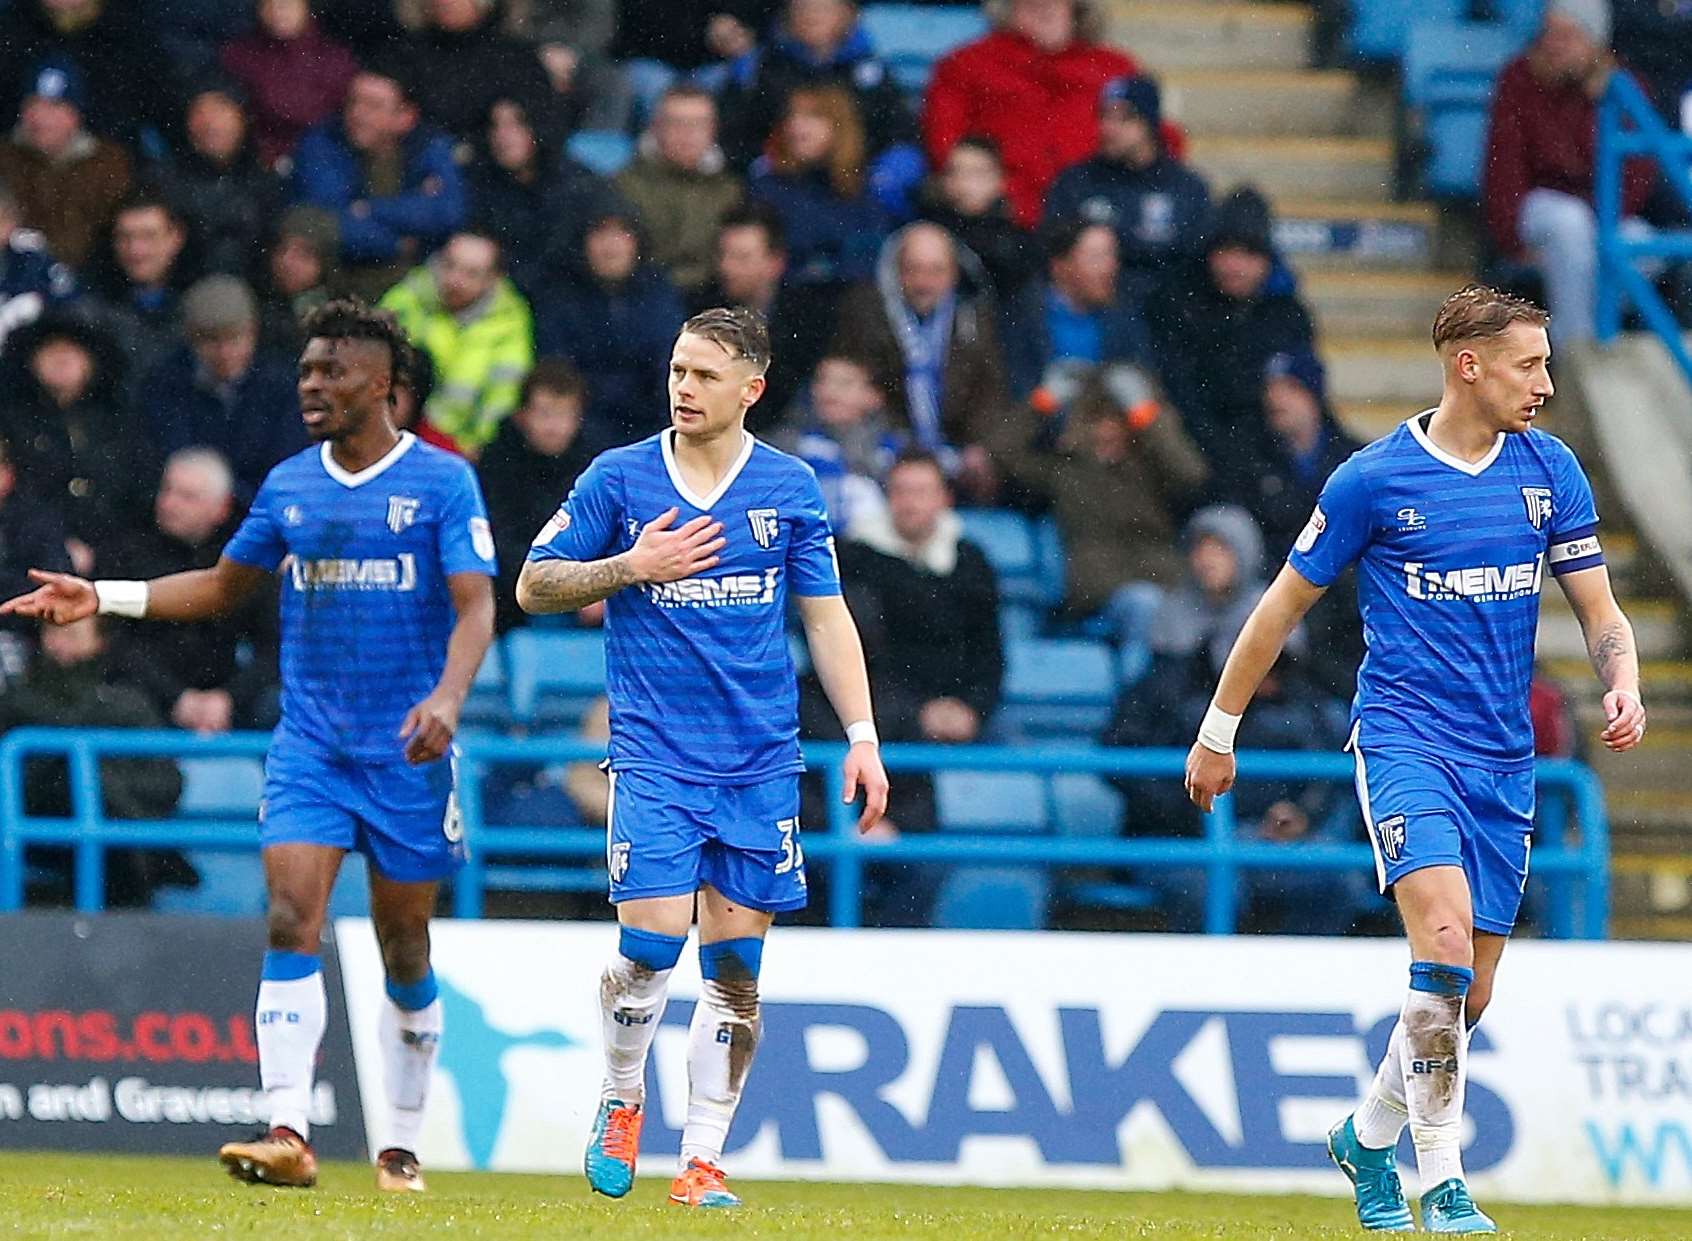 Gills were forced to chase the game after going 1-0 down in the 13th minute Picture: Andy Jones